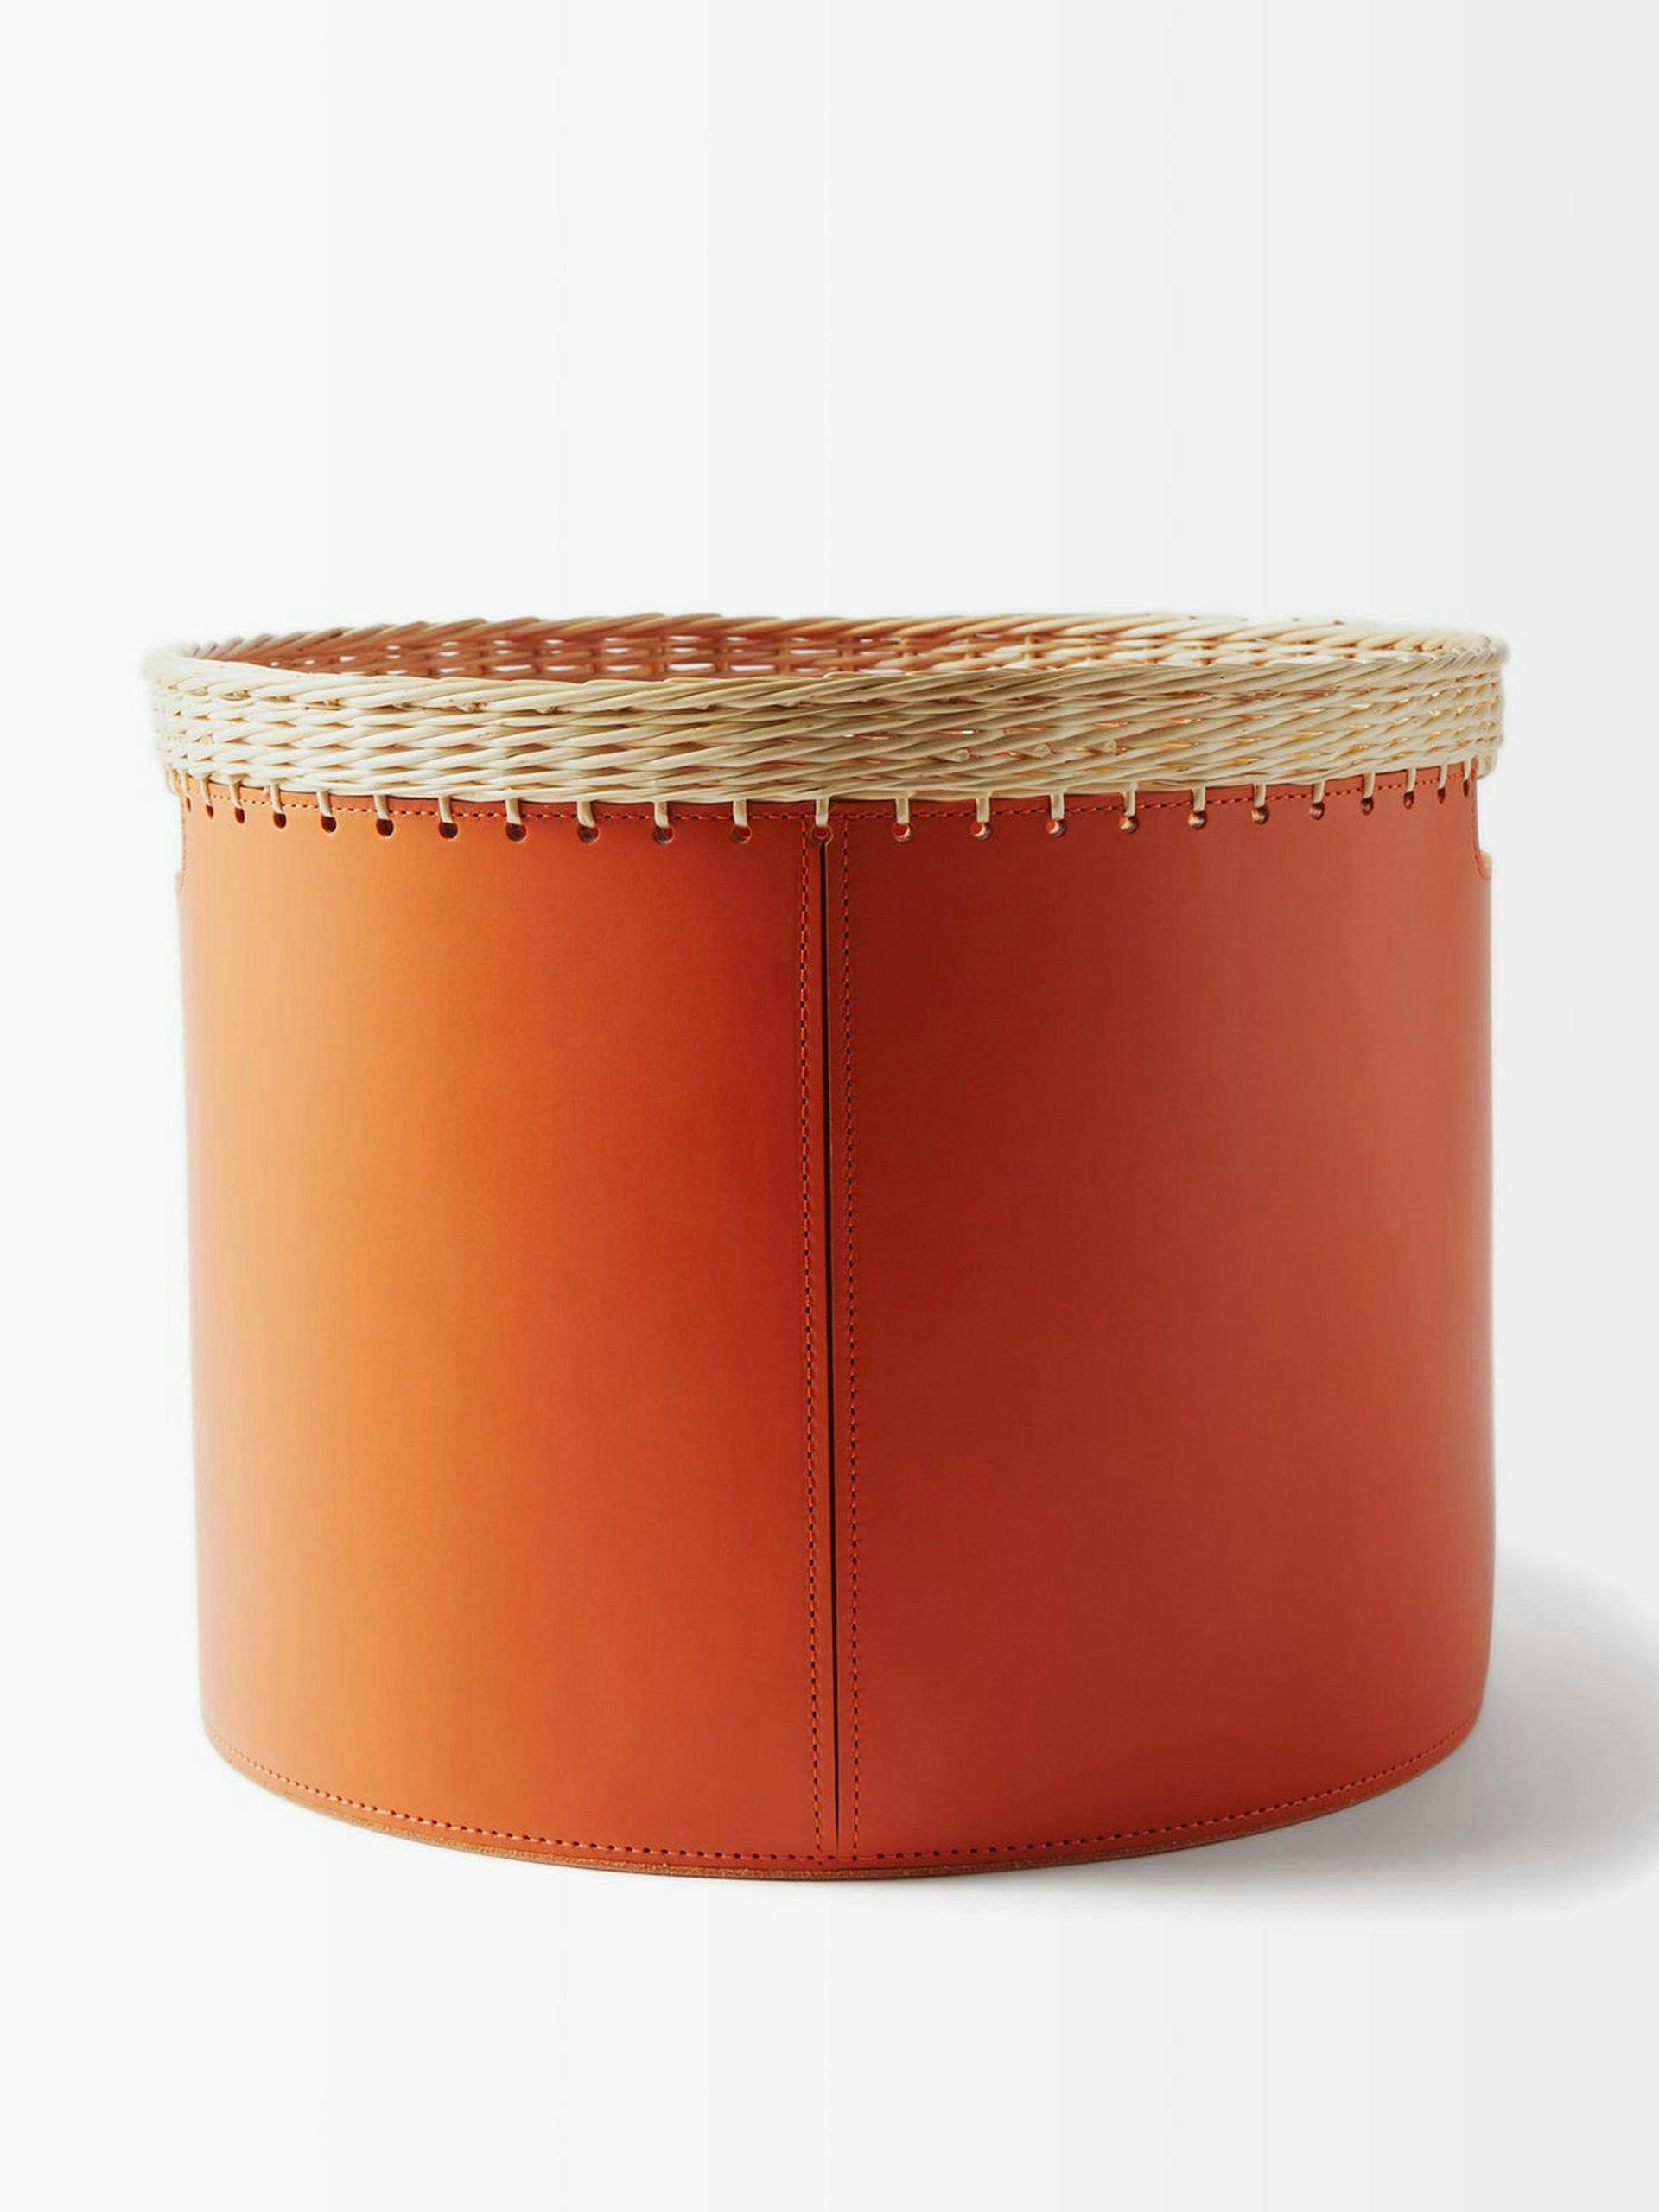 Como small leather and wicker basket